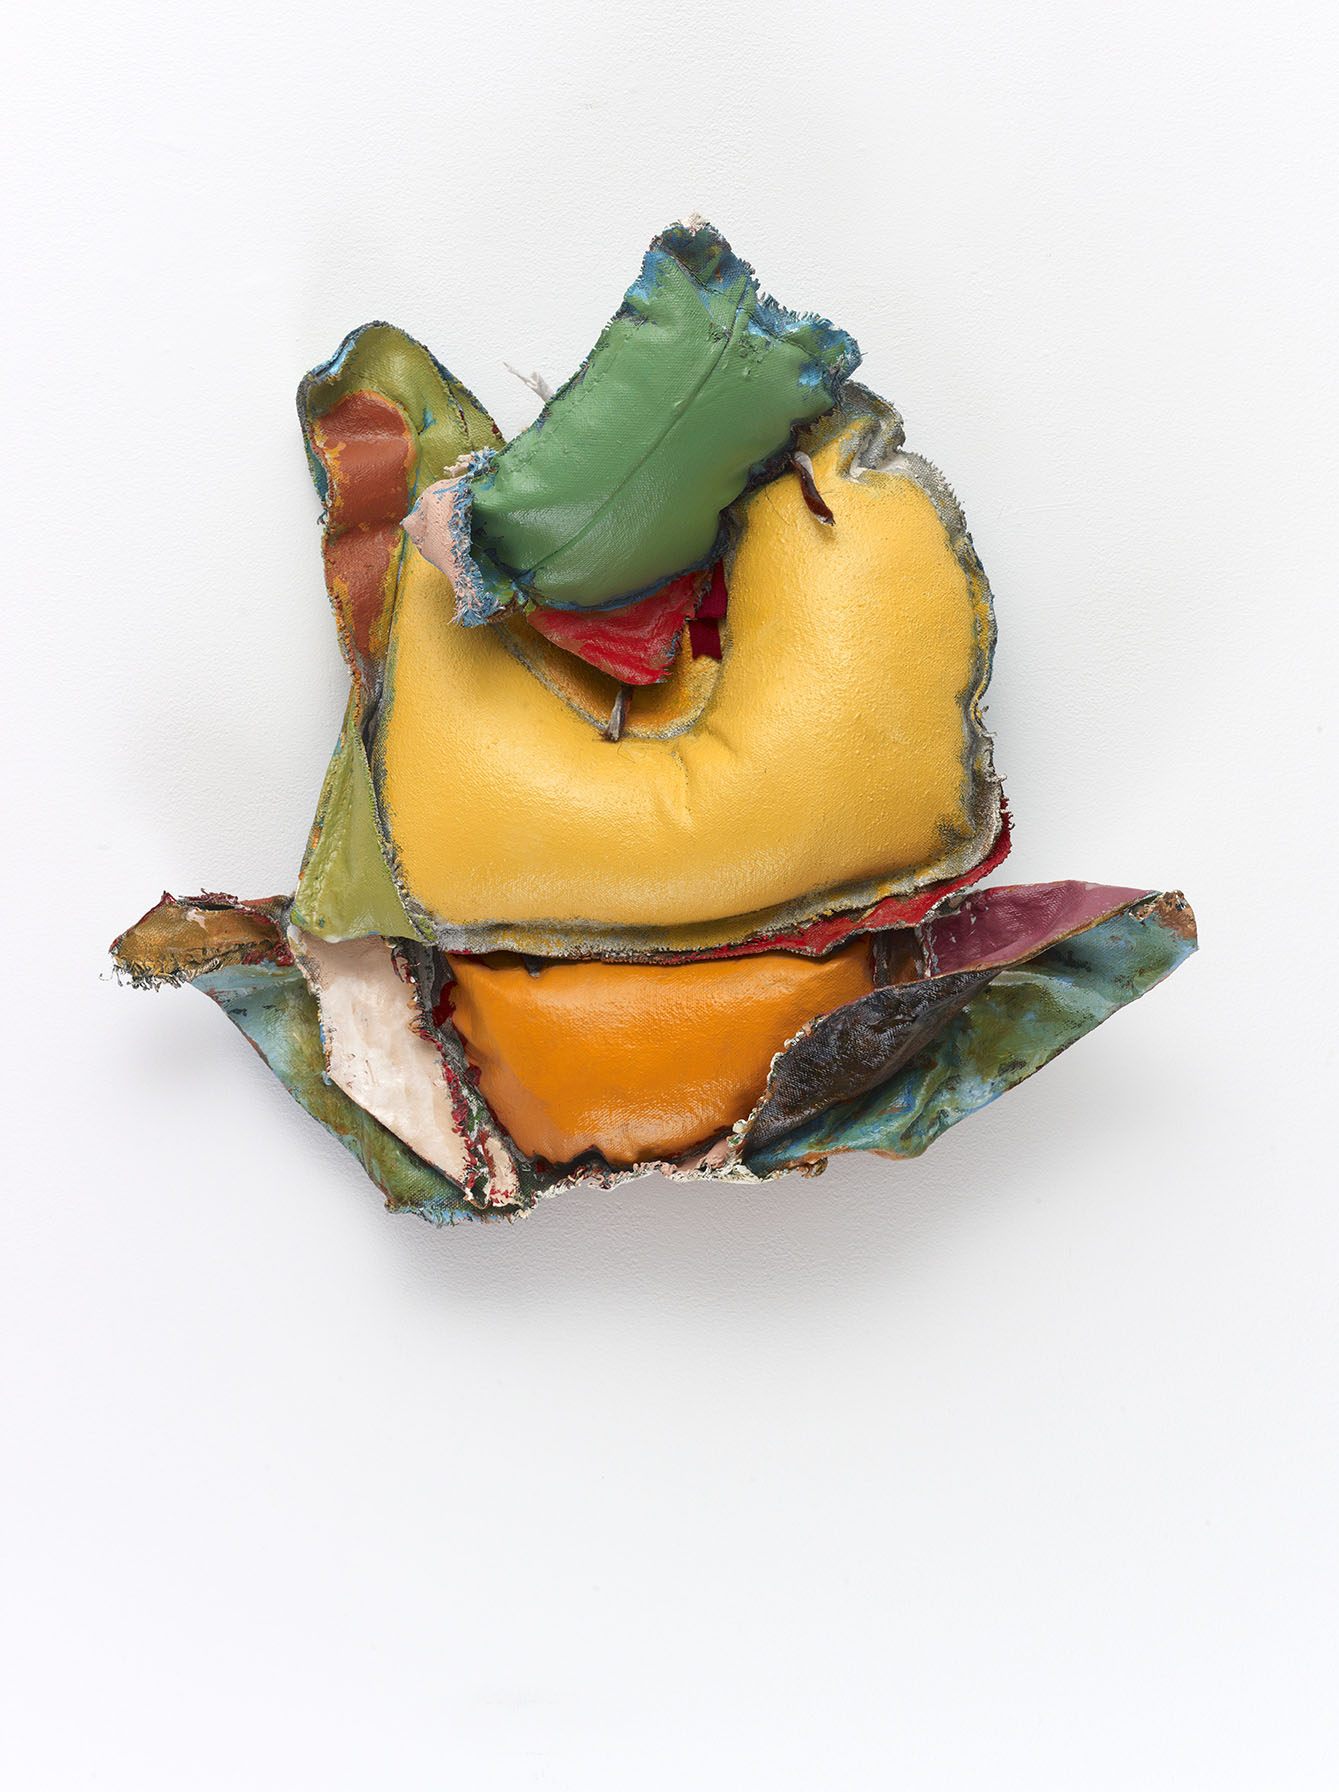 John Outterbridge, Rag and Bag Idiom I, 2012. Mixed media. 14 ½ x 15 ¾ x 3 ½ inches. The Eileen Harris Norton Collection. Image courtesy of Tilton Gallery, New York.